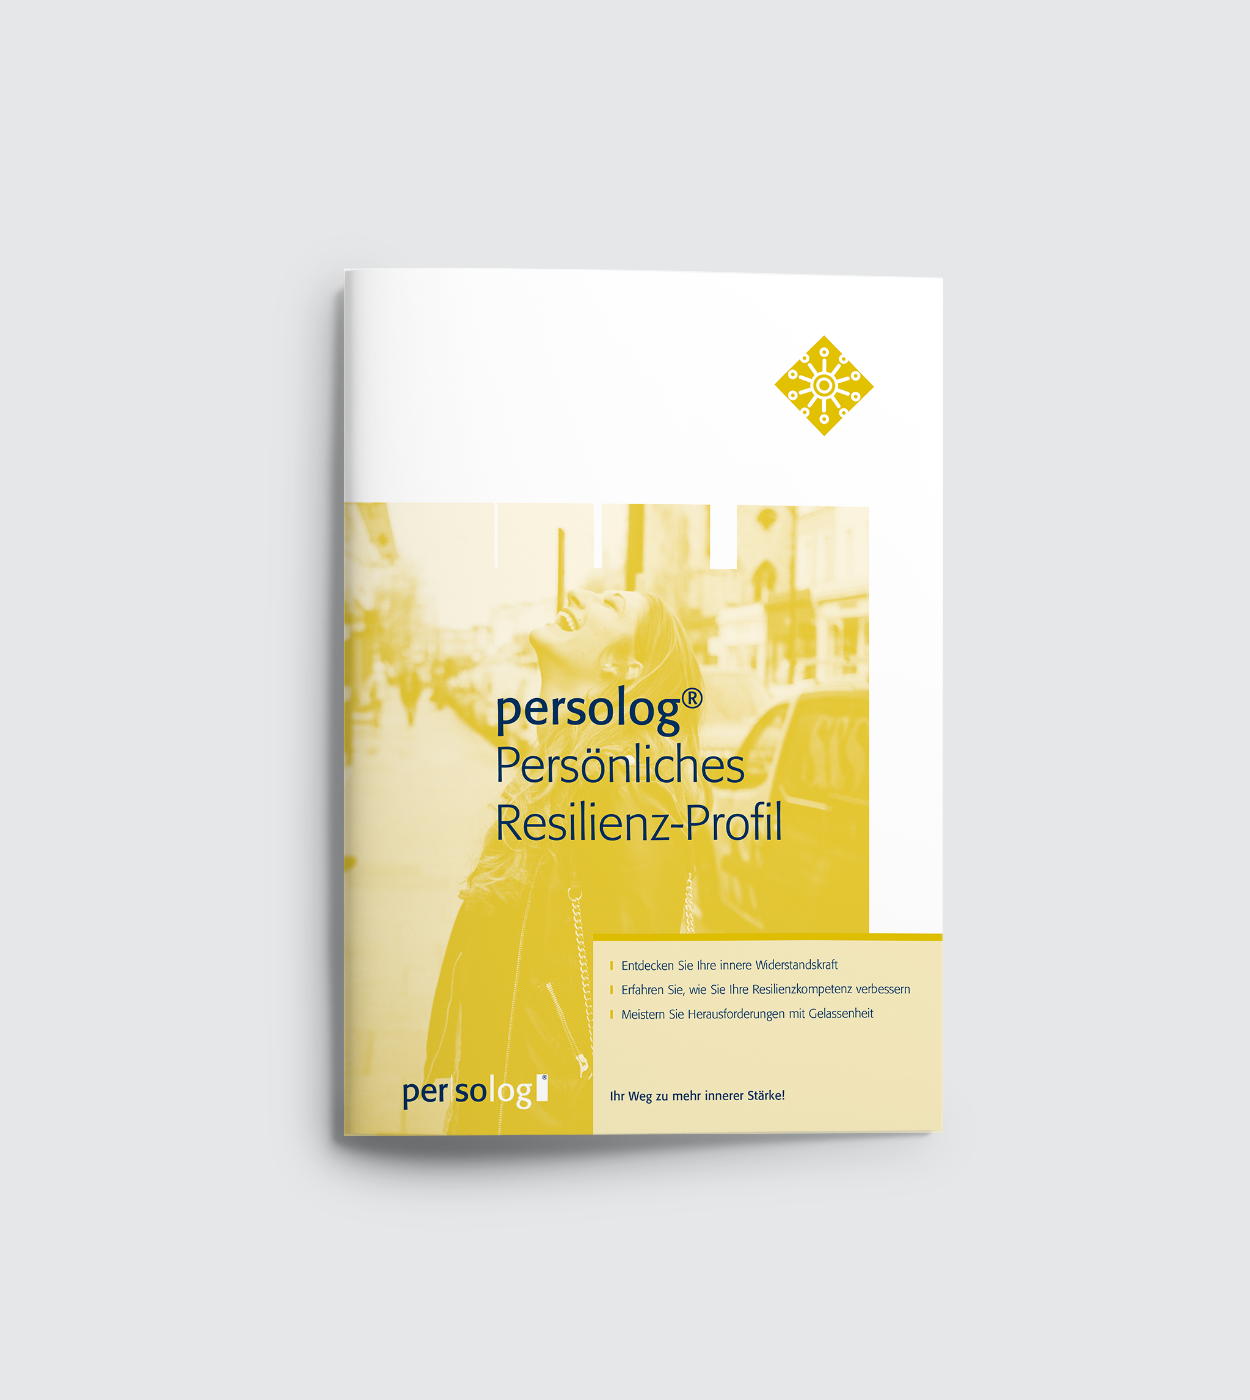 persolog® Personal Resilience Profile